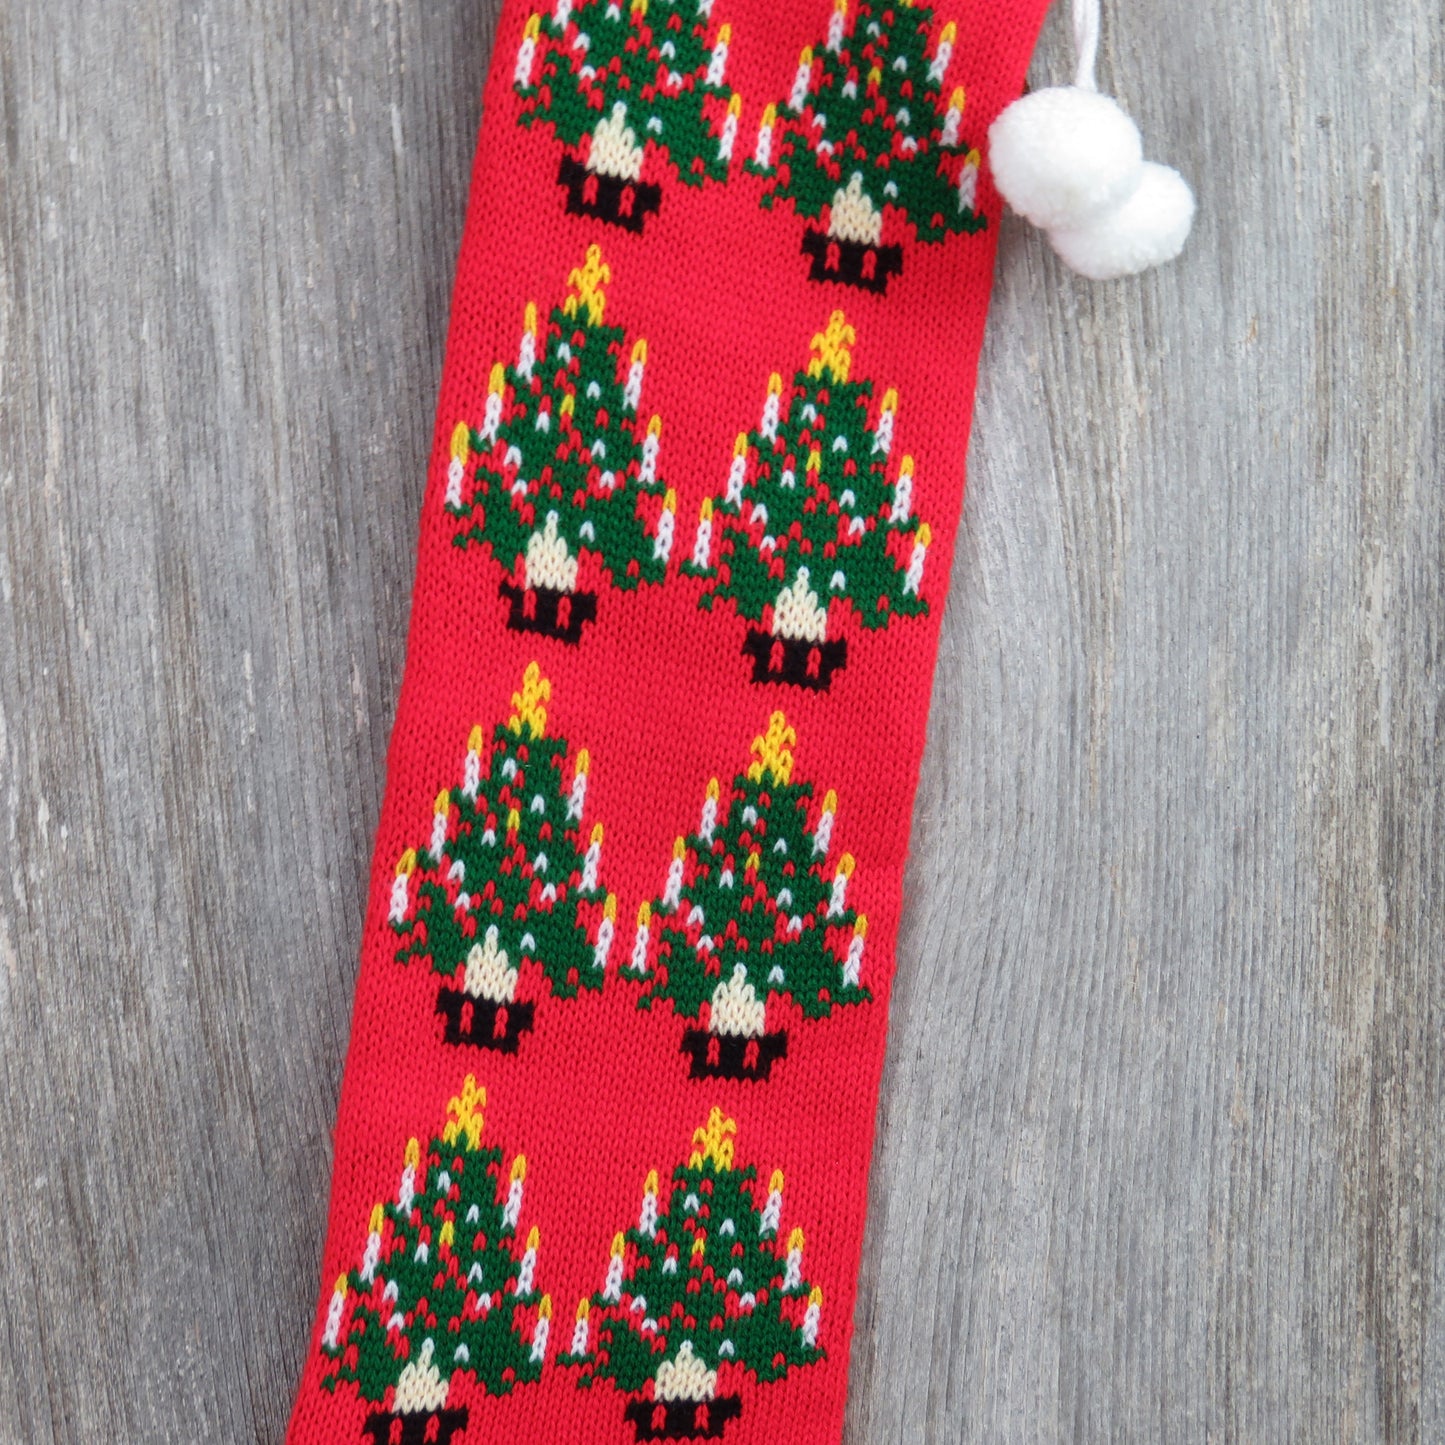 Vintage Christmas Tree Knit Stocking Red Green Pom Pom Candle Thailand - At Grandma's Table